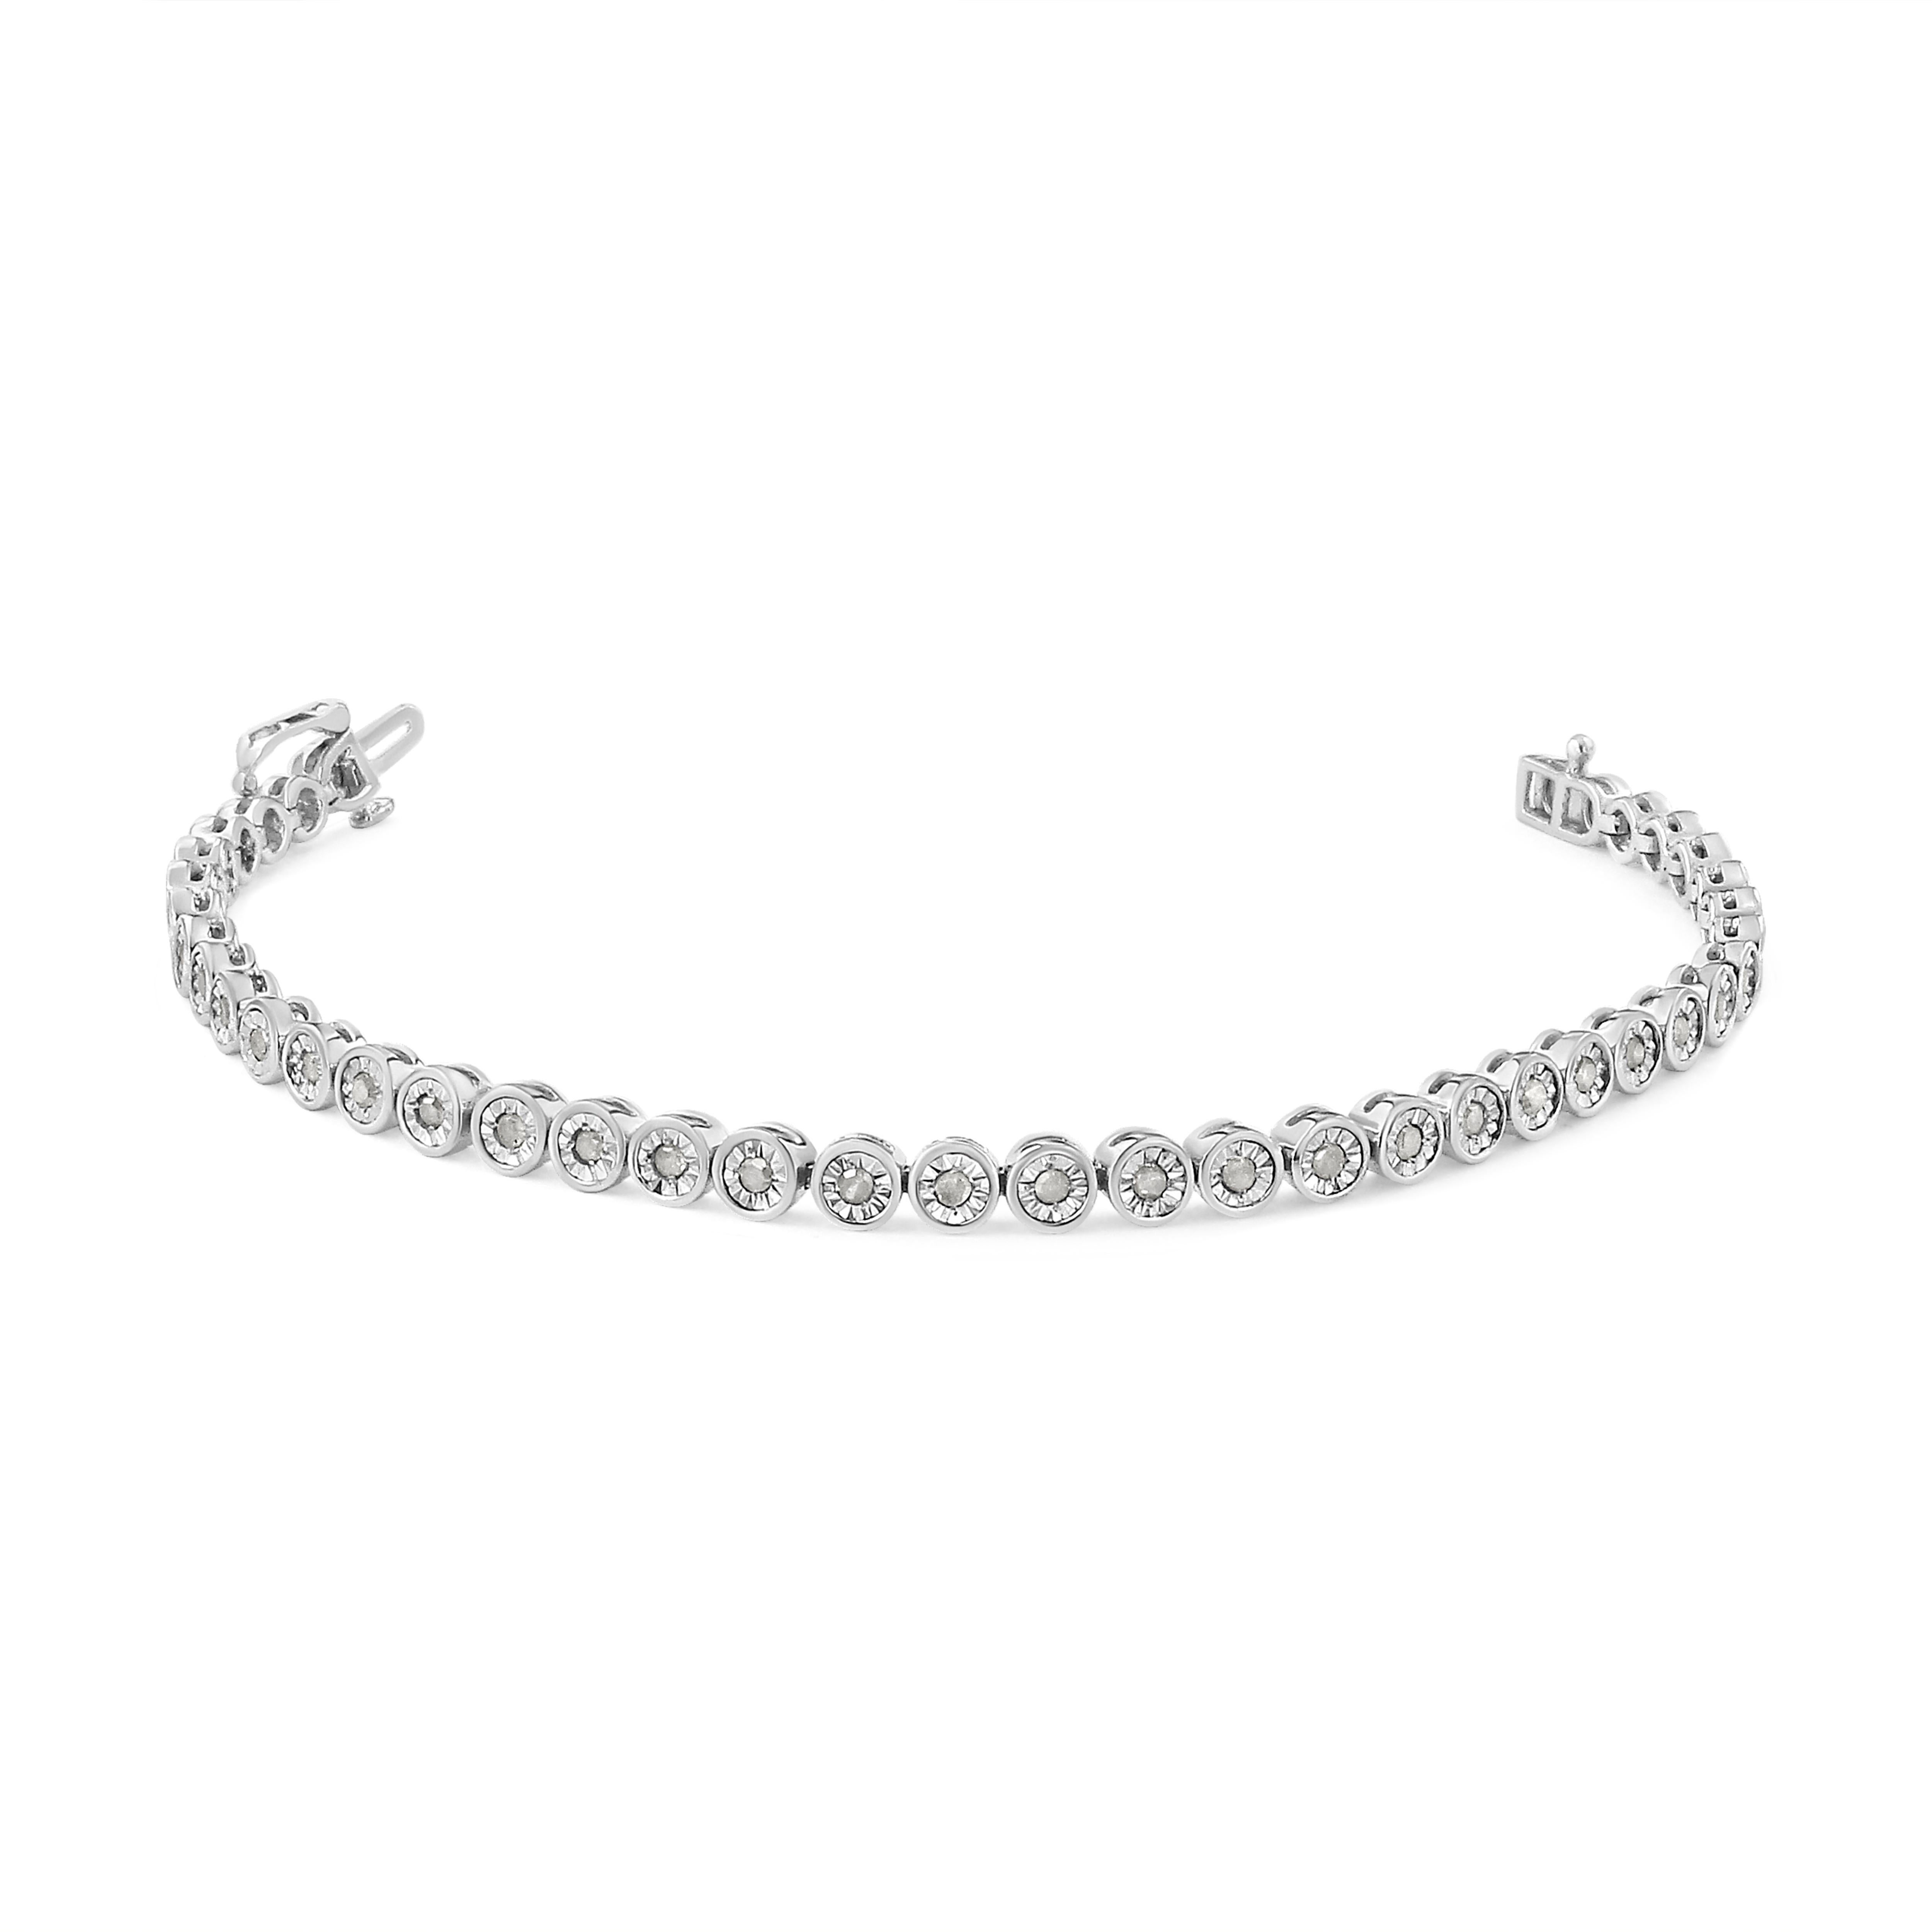 Elegant and timeless, this gorgeous sterling silver tennis bracelet features 1.0 carat total weight of round, miracle set diamonds. The tennis bracelet features S shaped curved links with a single petite genuine round near colorless I-J color